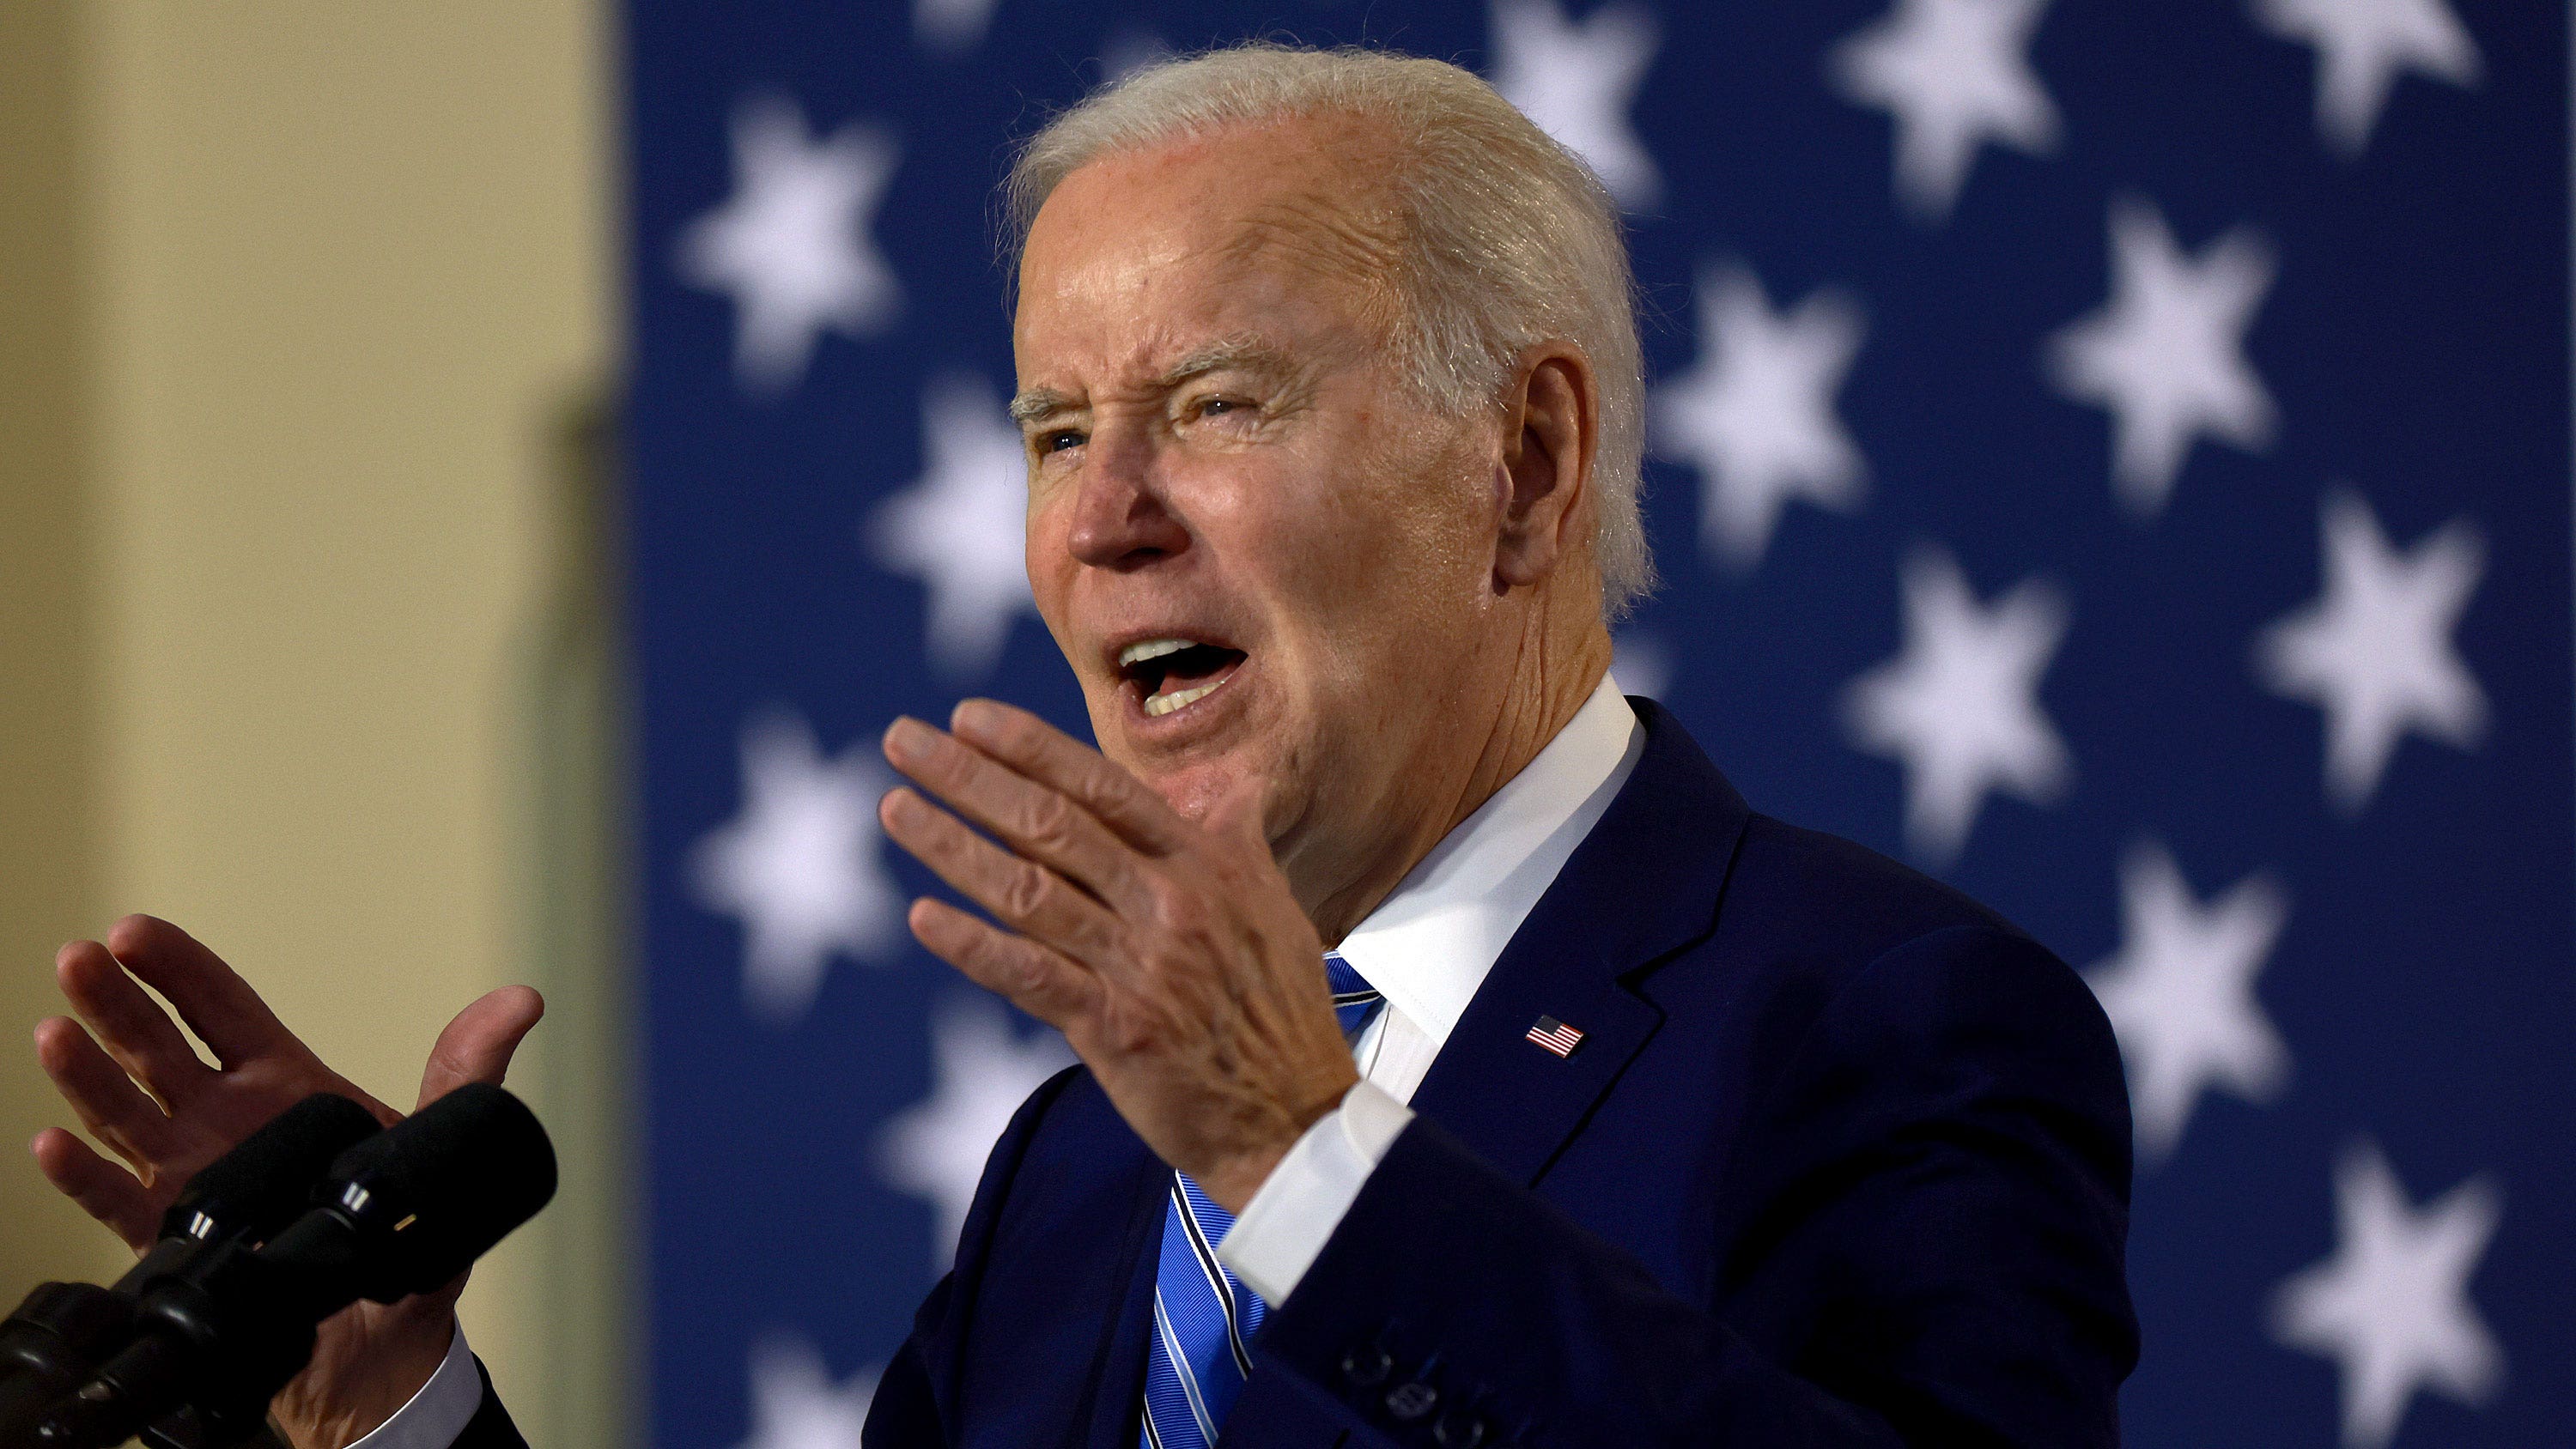 Biden admin’s taxpayer-backed contracts to help illegal immigrants avoid deportation come under a microscope